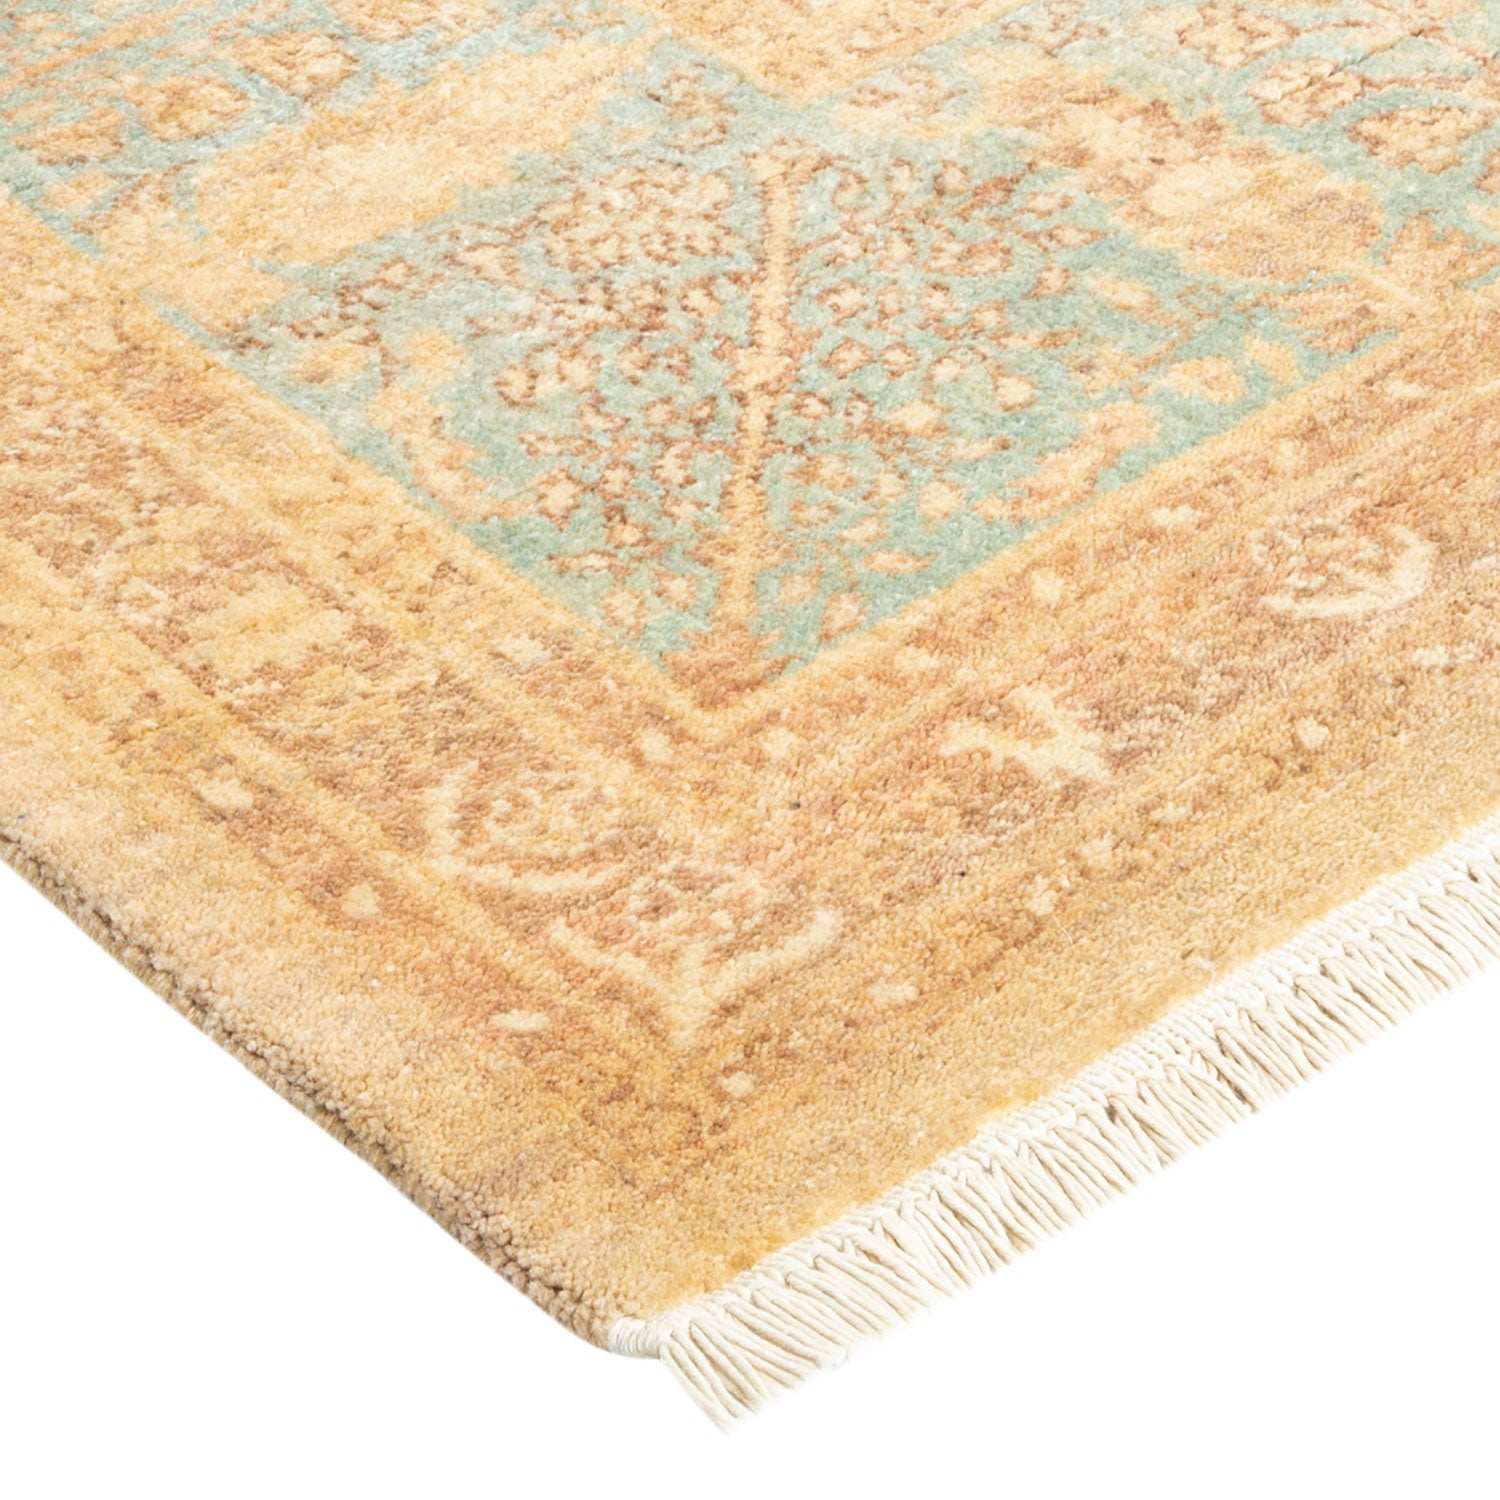 Faded vintage rug with geometric and floral motifs in turquoise and beige.